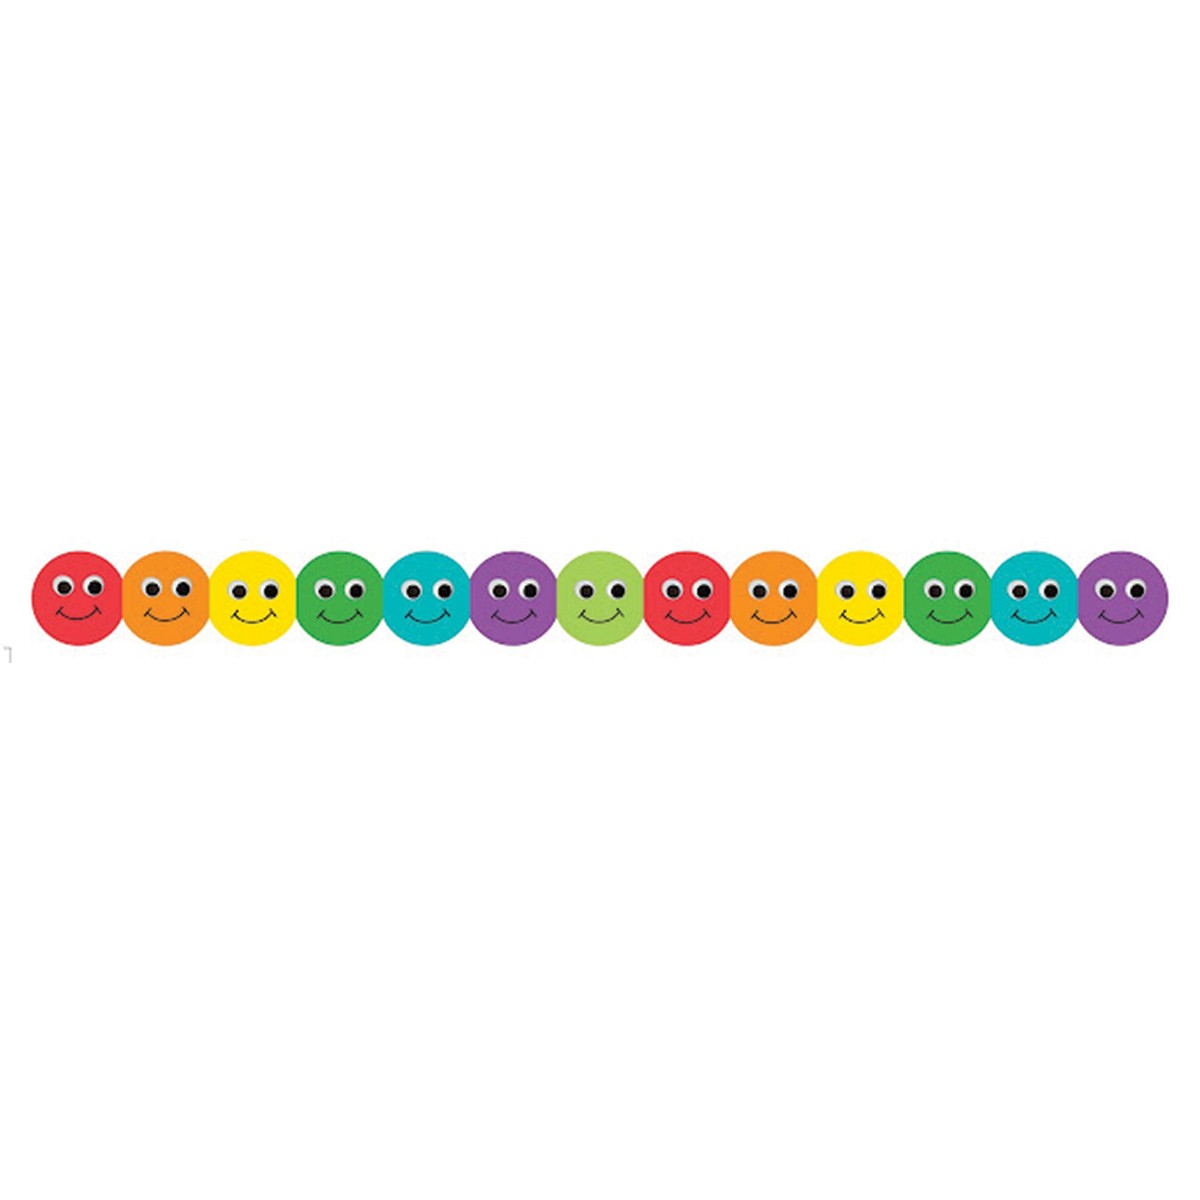 Free Smiley Face Border, Download Free Clip Art, Free Clip